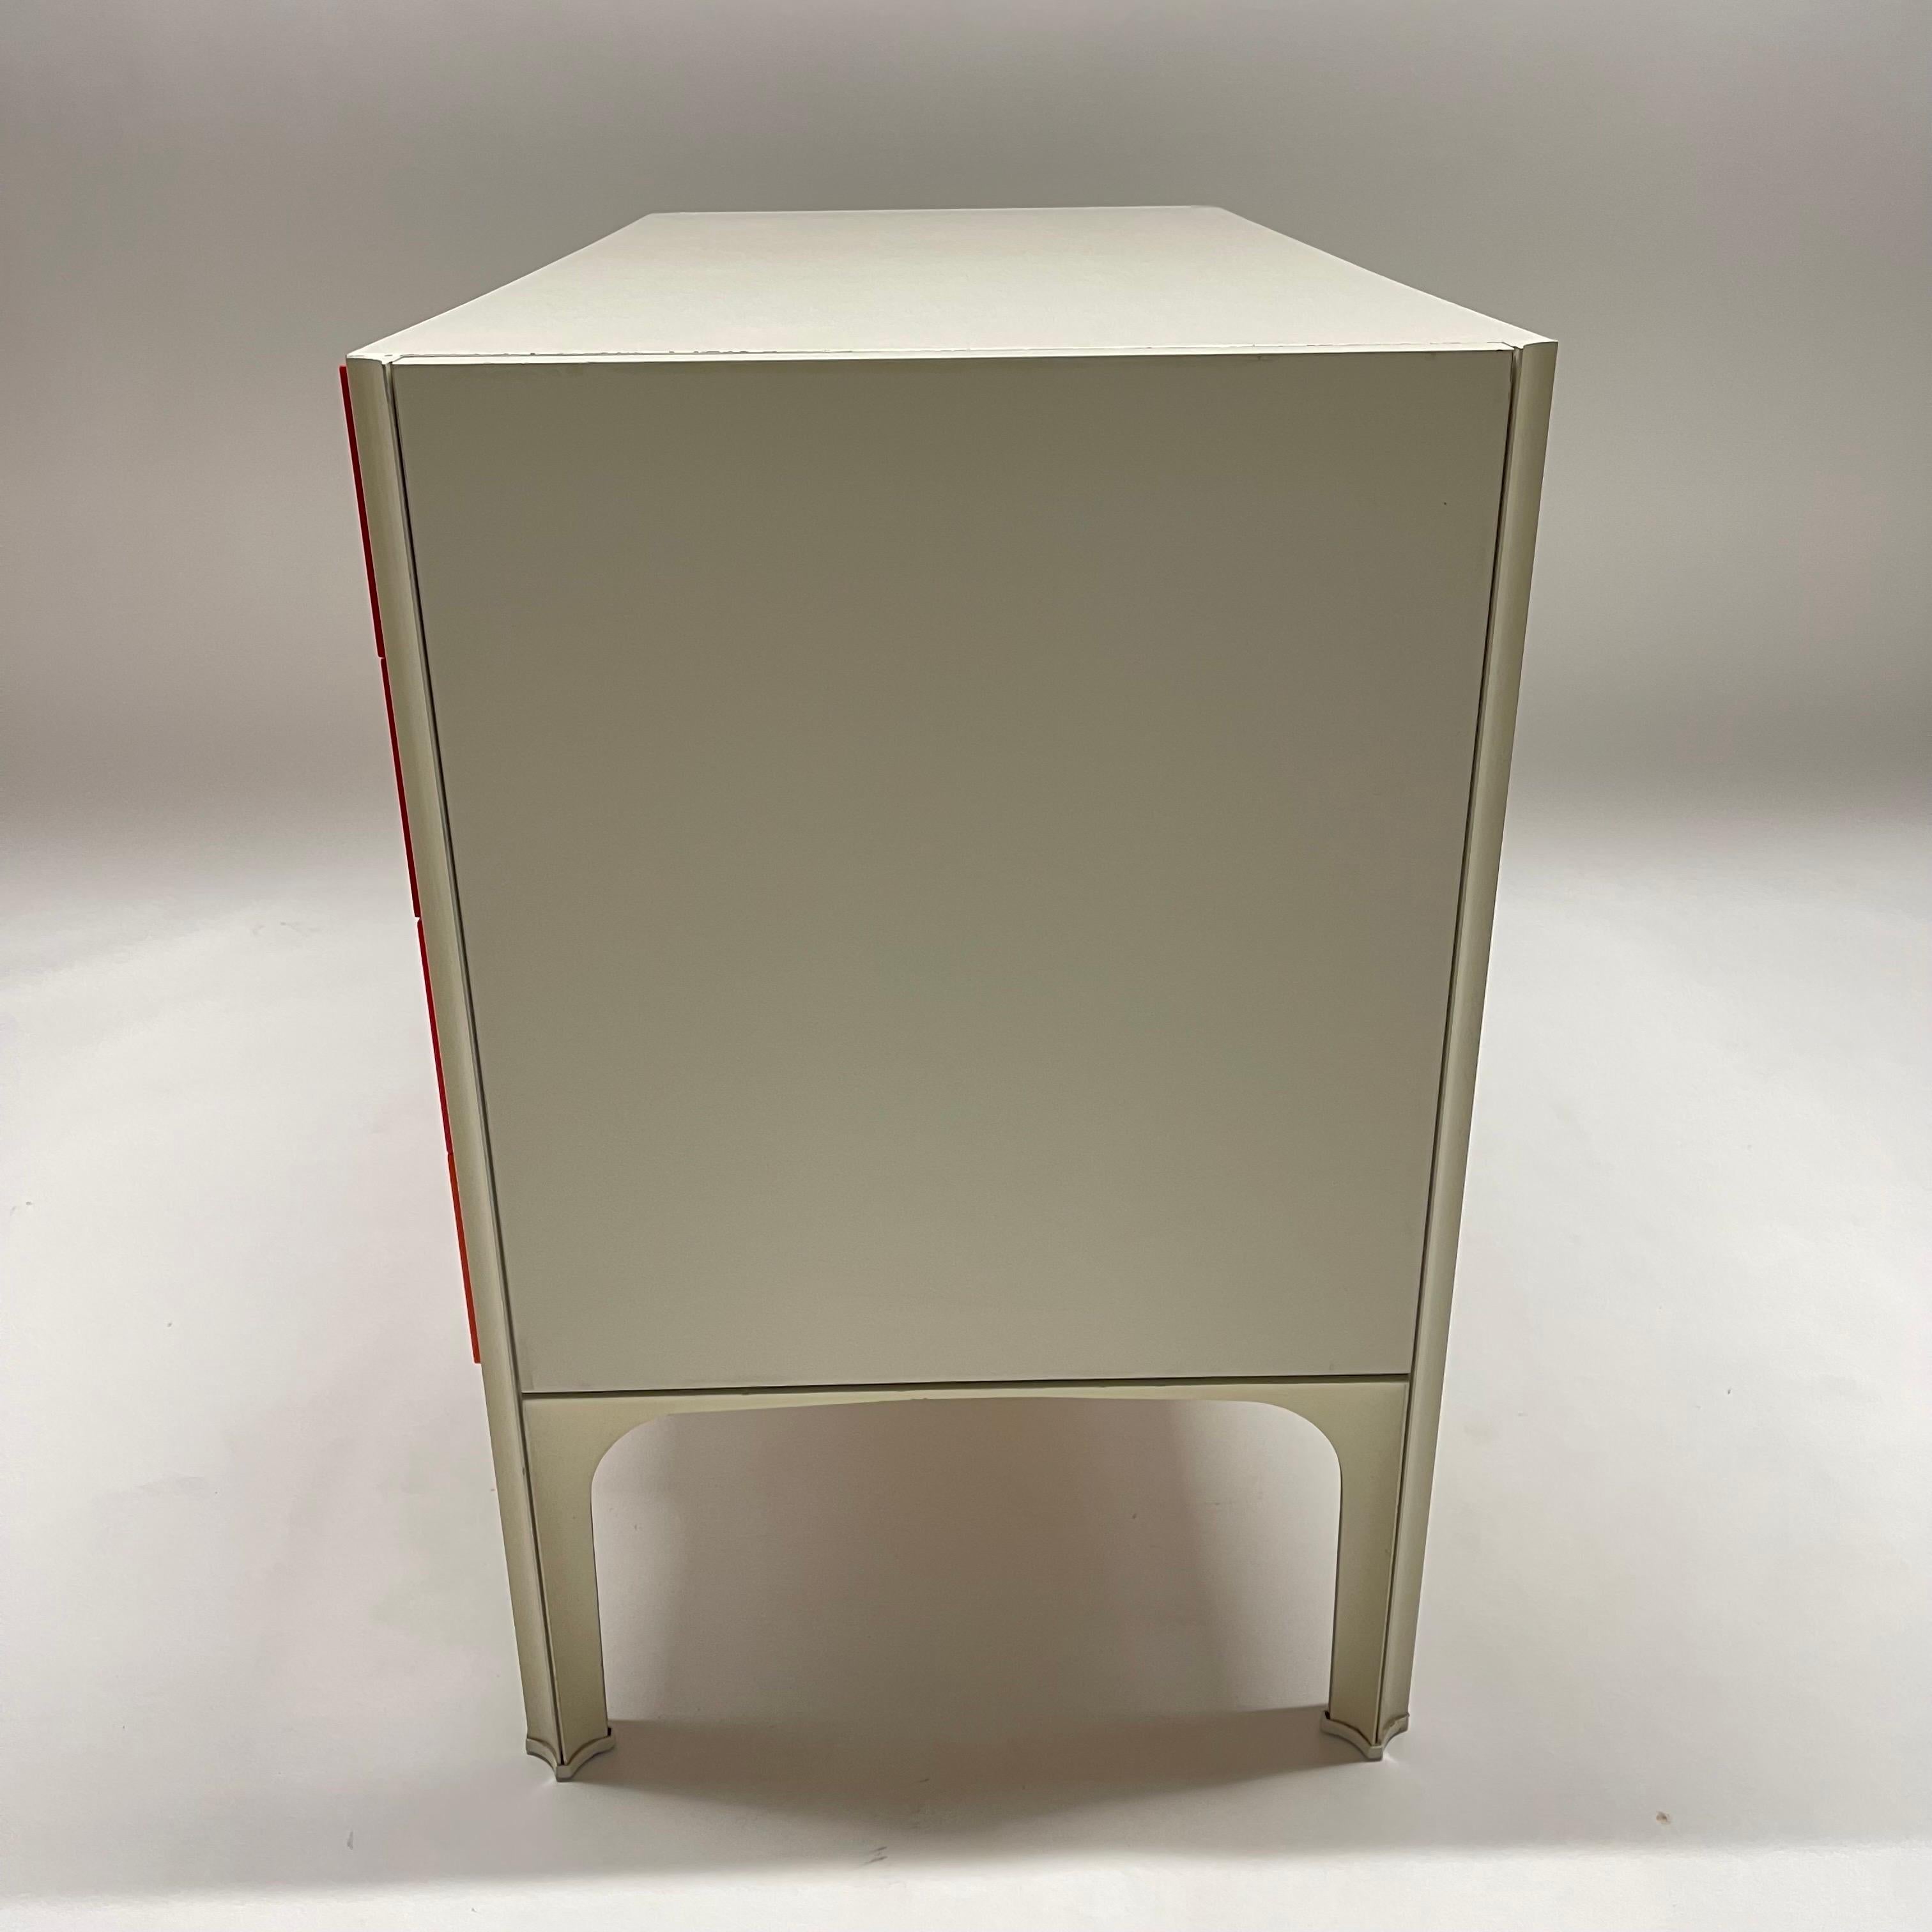 French Raymond Loewy DF-2000 Commode, Chest of Drawers, or Dresser, France, circa 1968